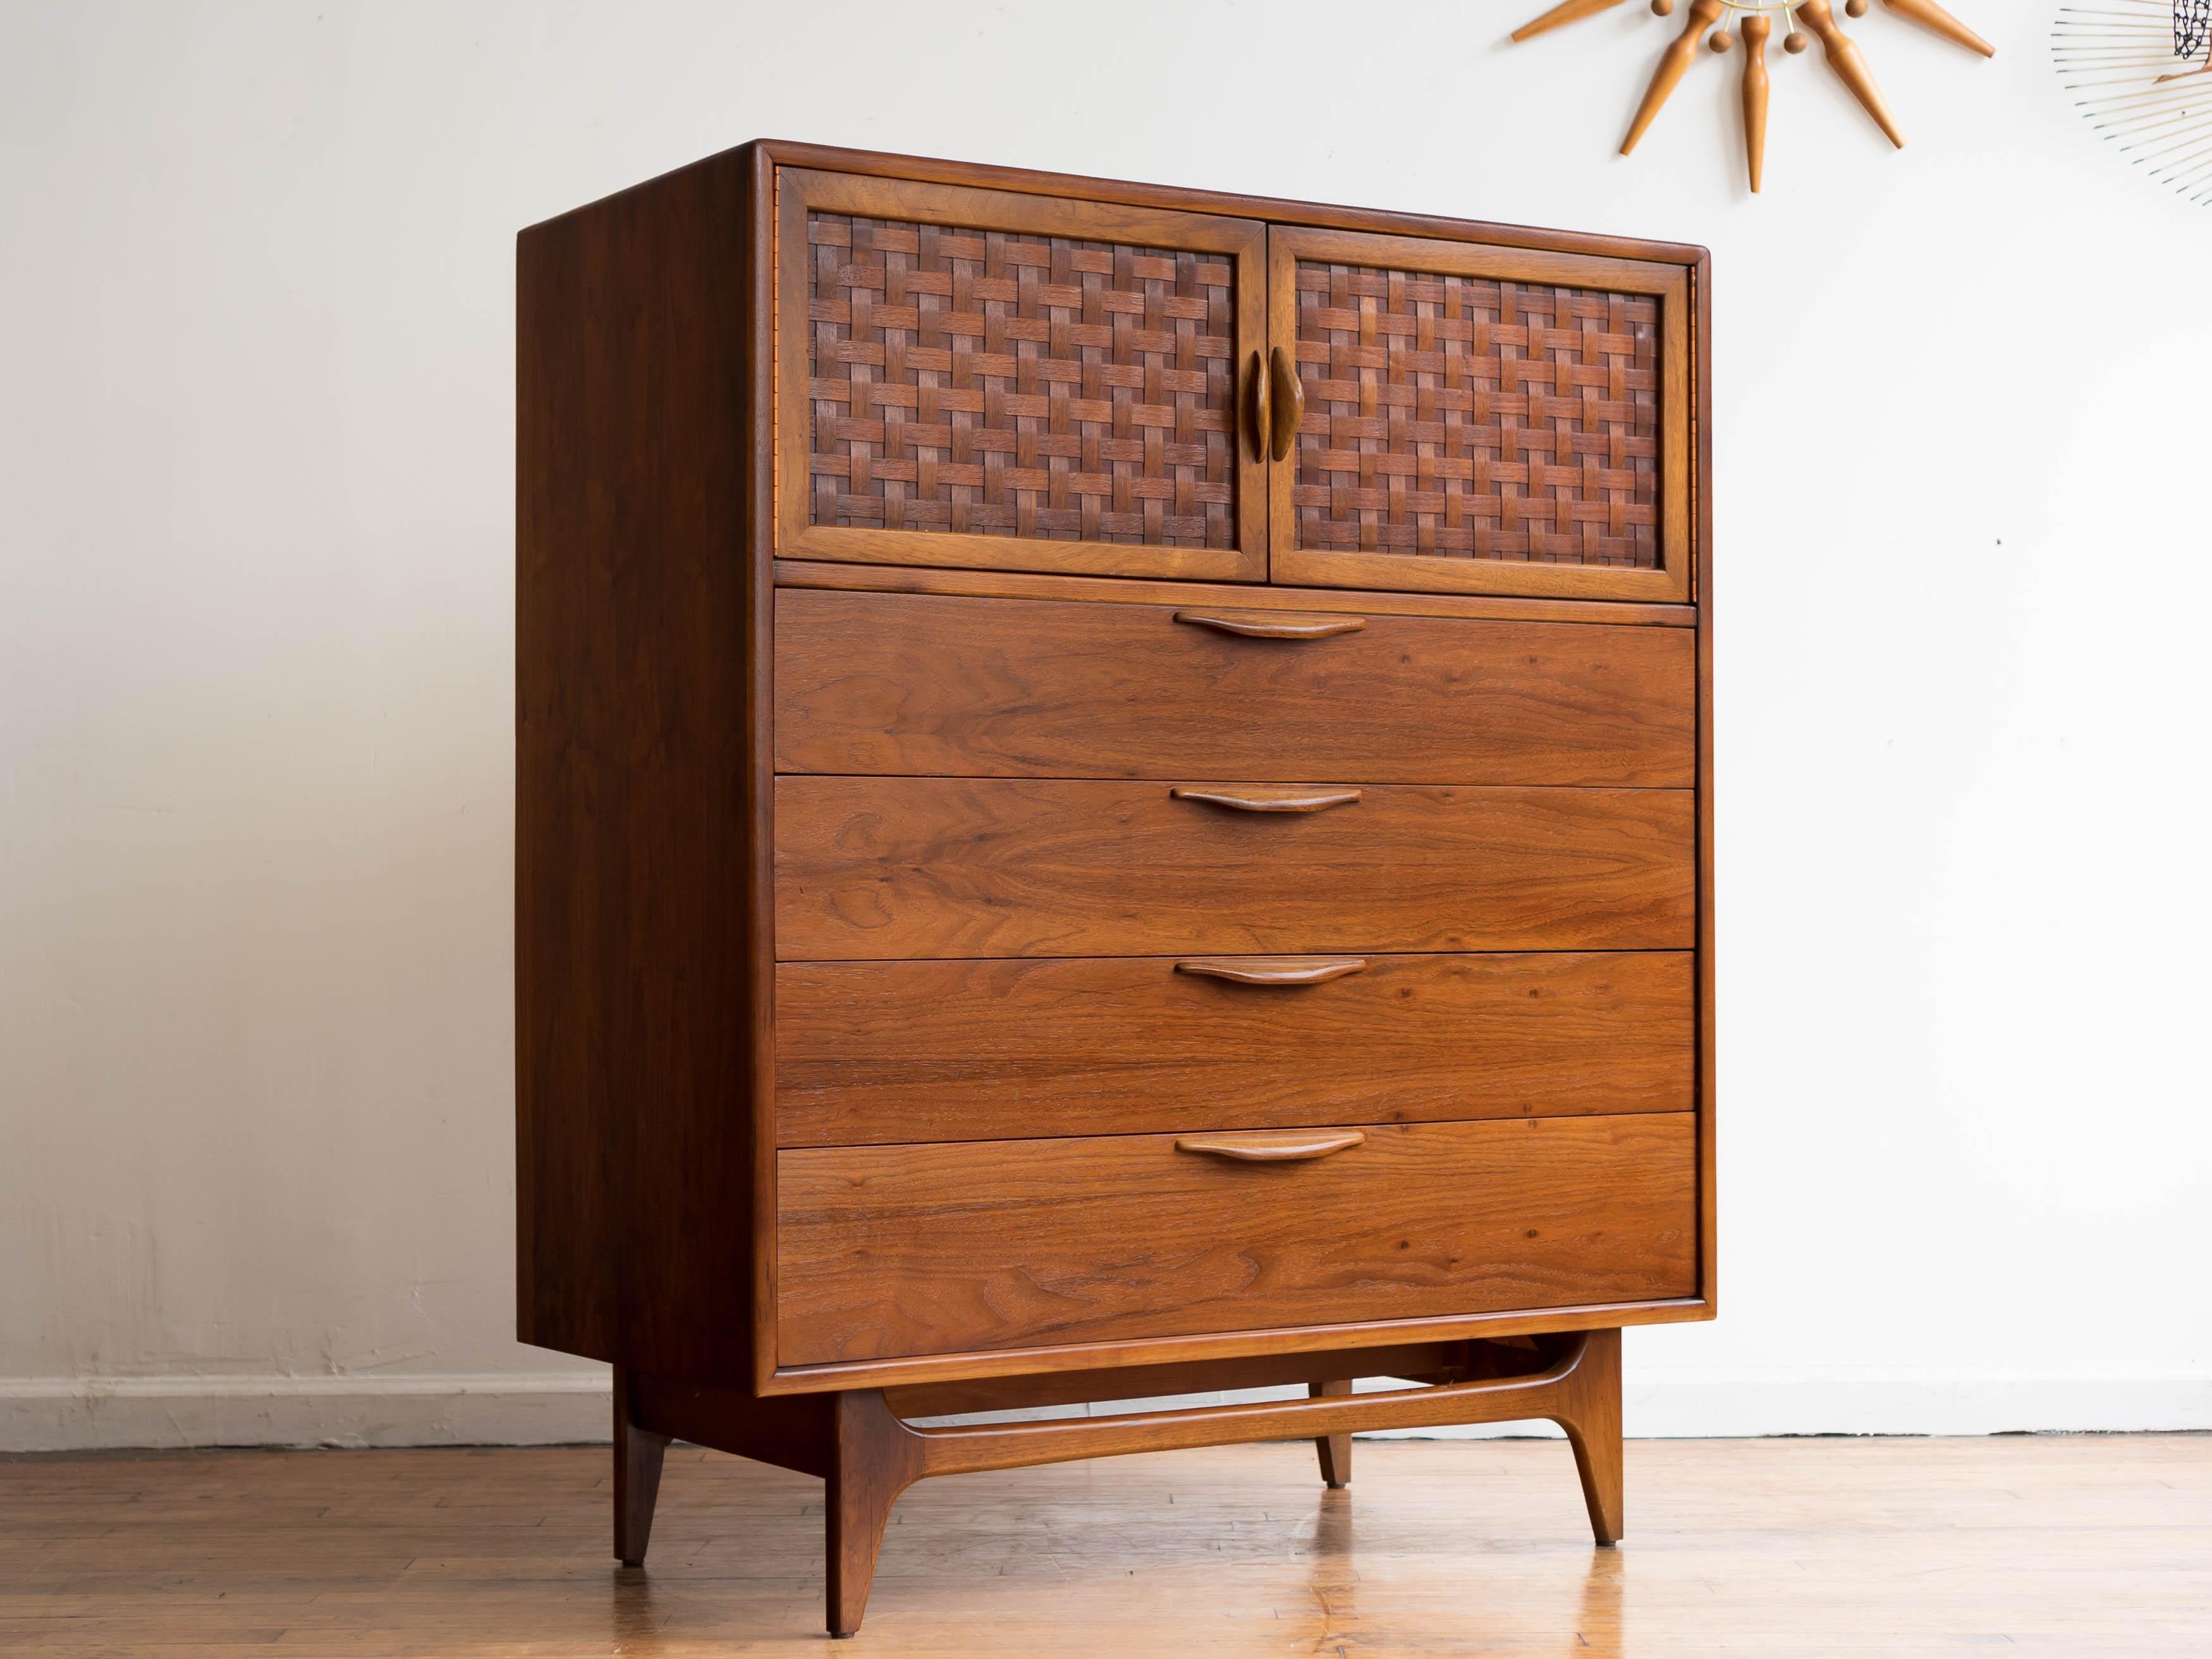 Measures: 40” x 19” x 48” H

This striking piece features two doors that open up to reveal a spacious storage area with a shelf, along with three drawers below for additional storage space. The chest is crafted from durable walnut with a natural